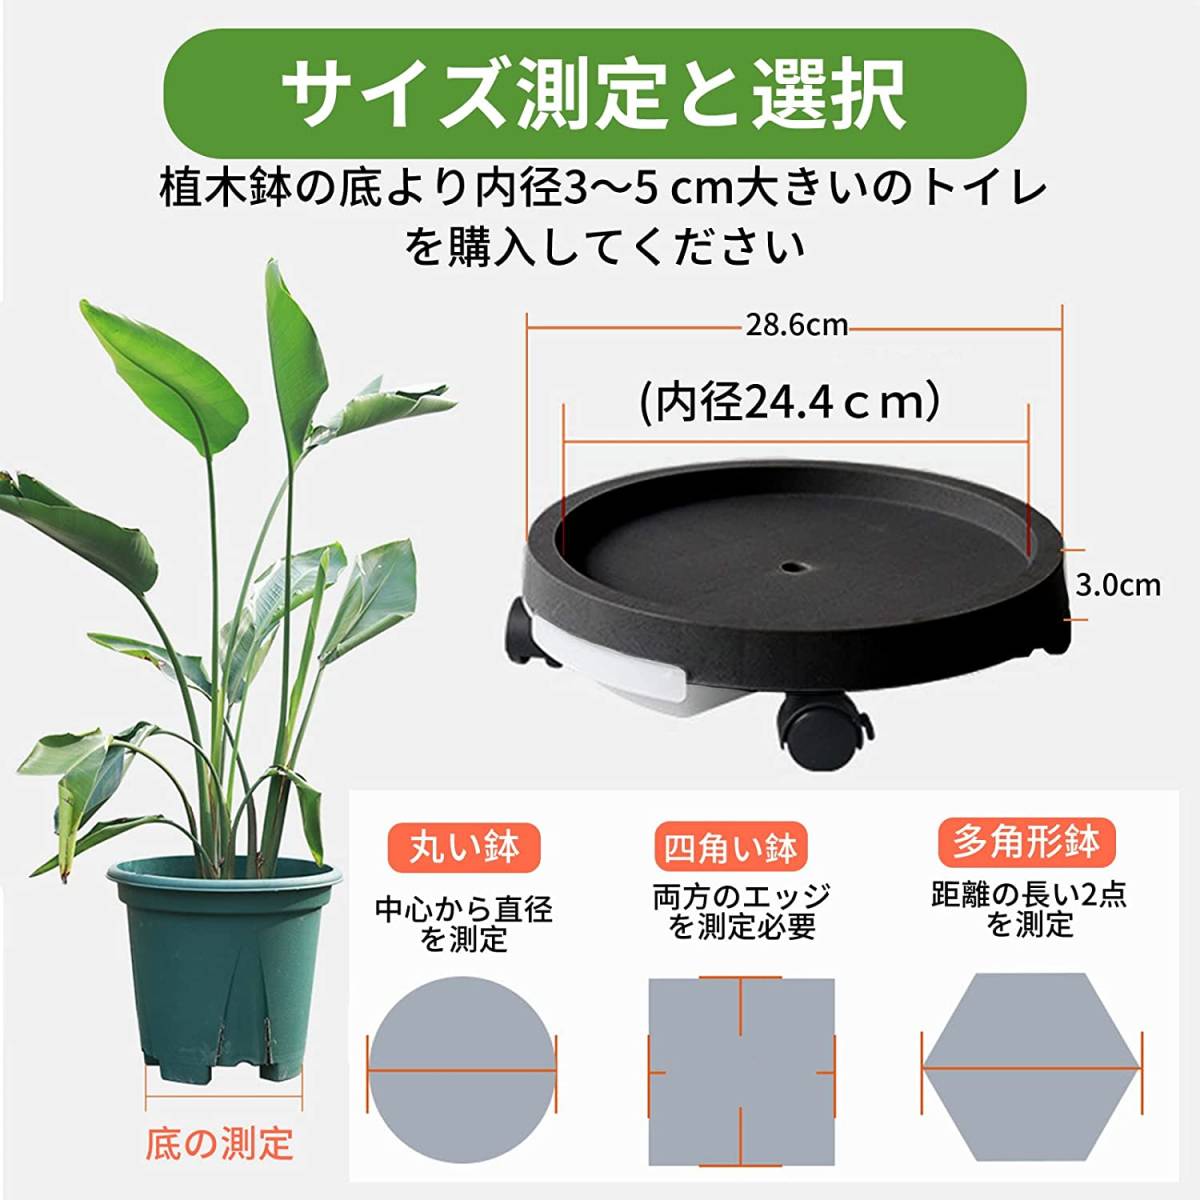  plant pot pcs . water attaching movement stand for flower vase pot . pcs flower stand pot . pcs caster saucer attaching 360° rotation. caster lock possibility stopper attaching 